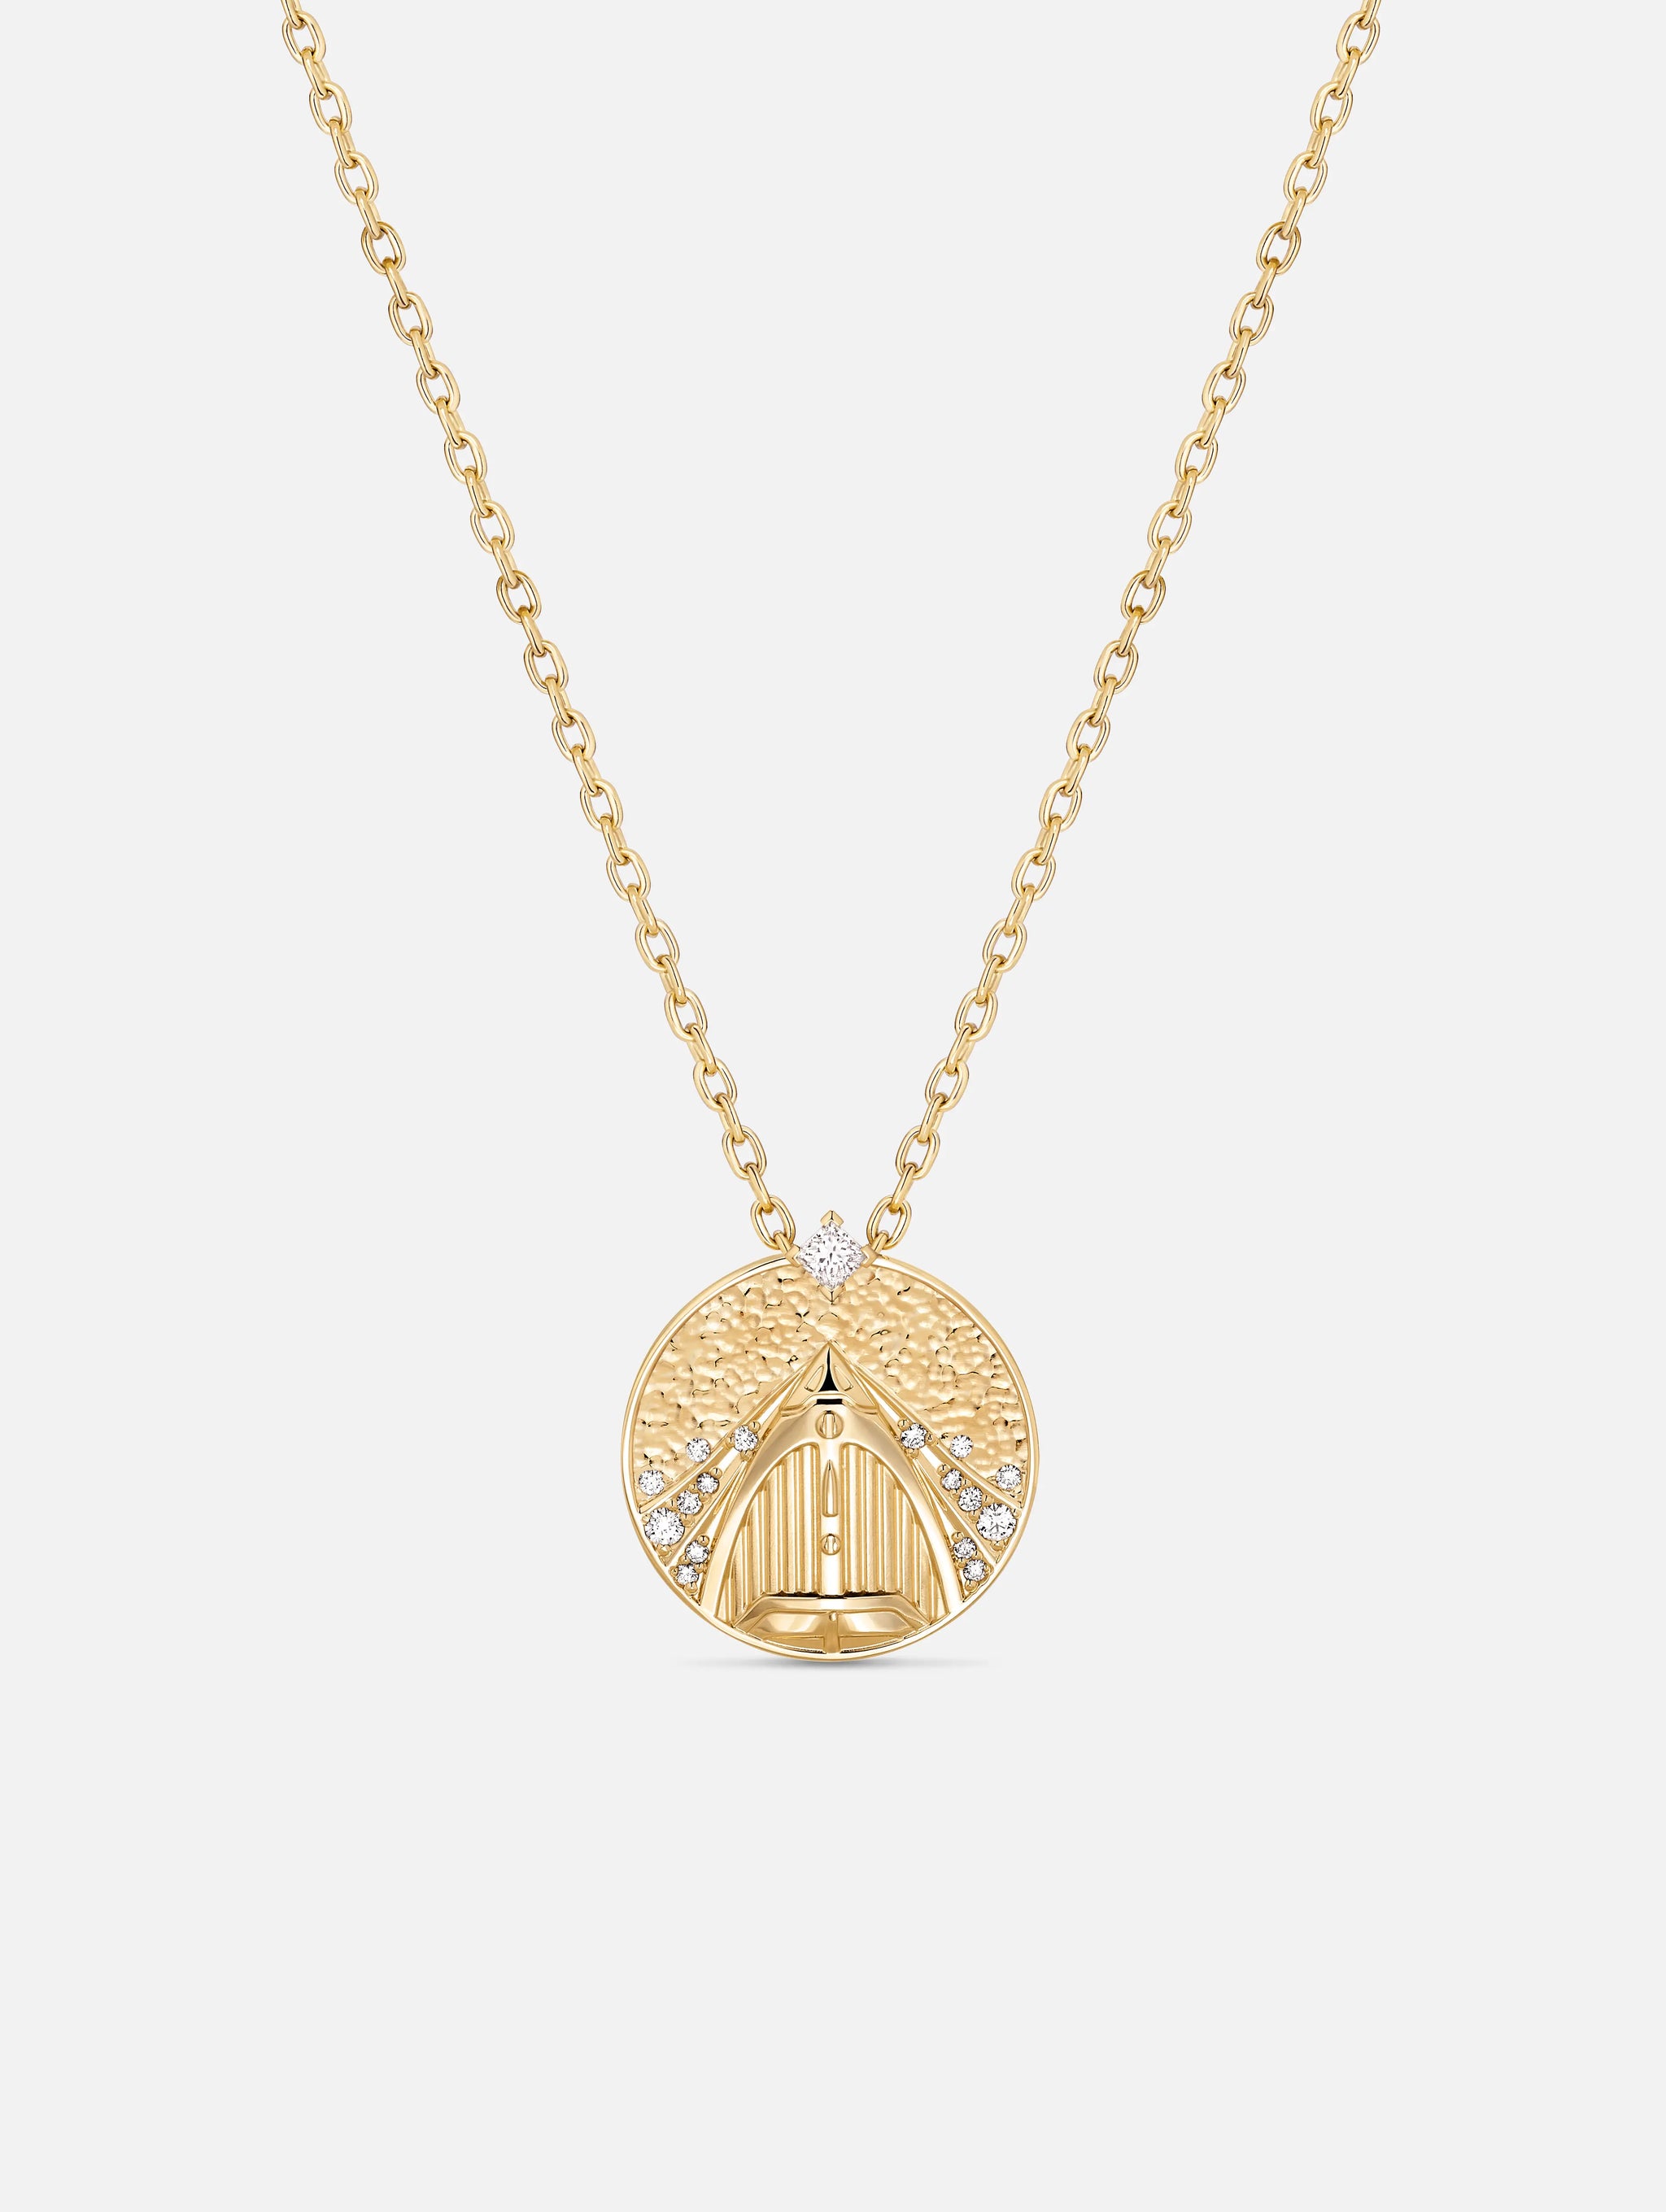 Island Hop Medallion in Yellow Gold - 1 - Nouvel Heritage